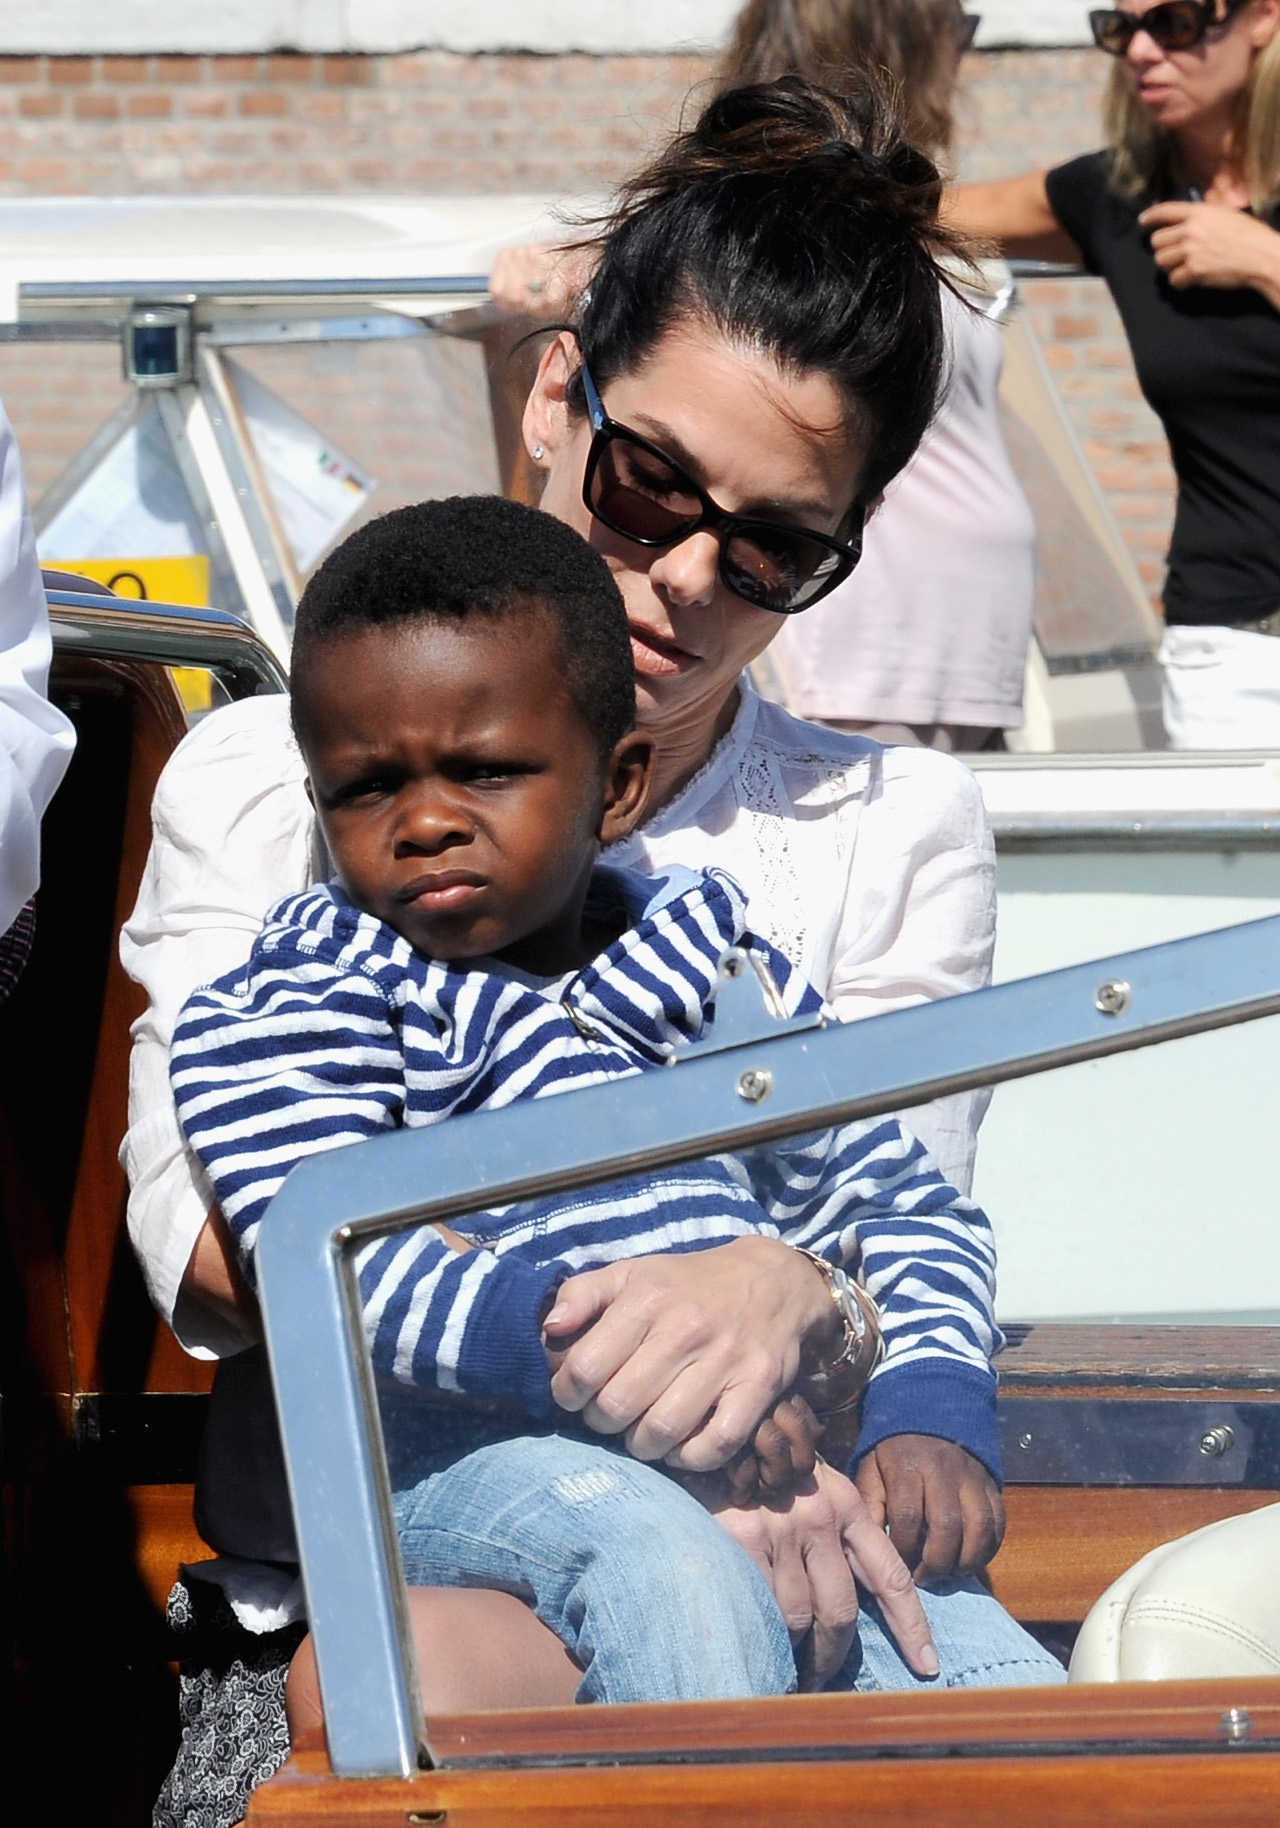 Sandra Bullock and her son Louis Bardo Bullock during the 70th Venice International Film Festival on August 27, 2013, in Venice, Italy | Source: Getty Images